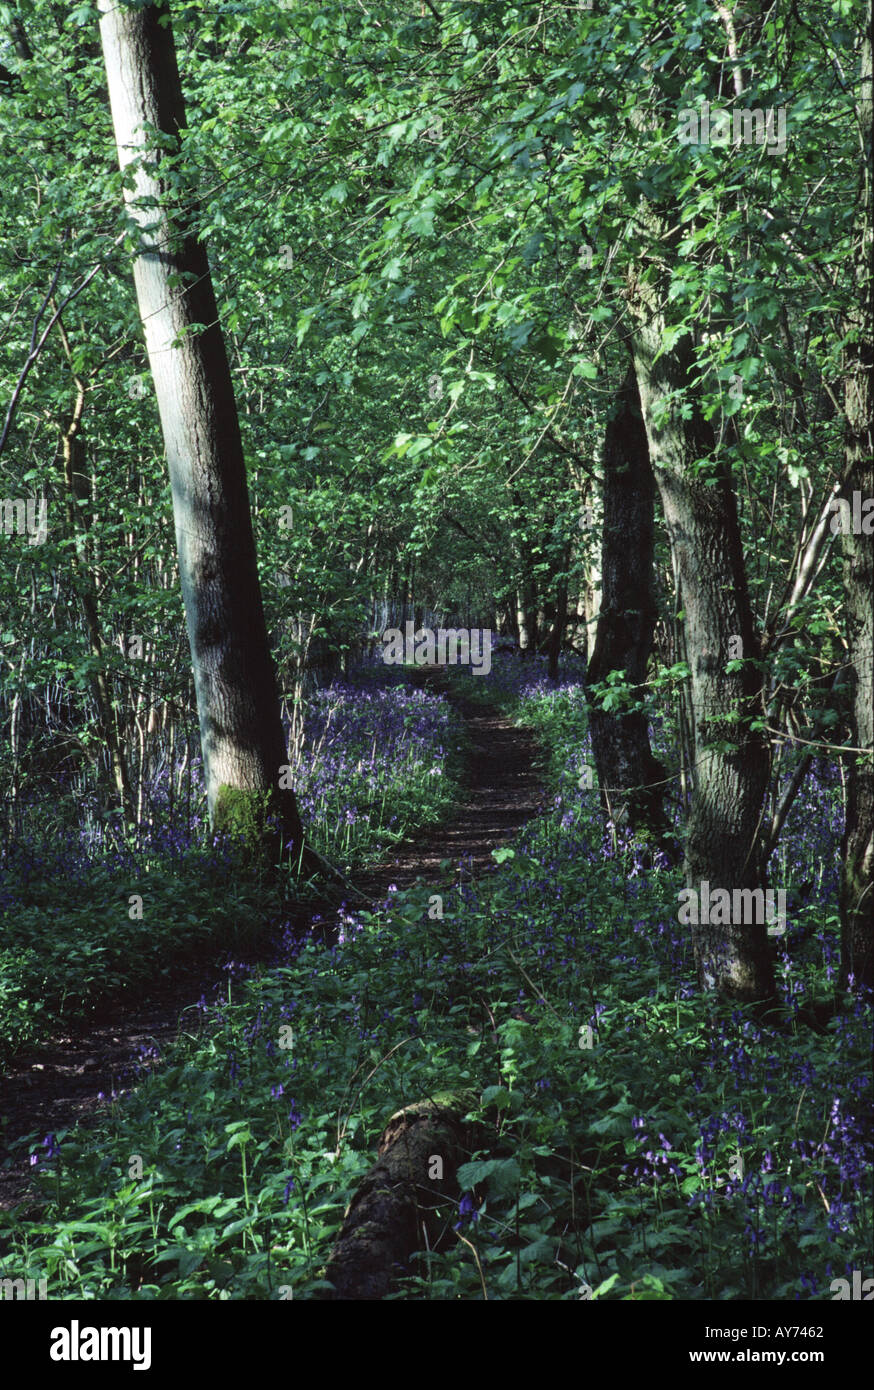 Bluebells Hyacinthoides non scripta and trail in forest Hayley Wood Cambridgeshire England Stock Photo